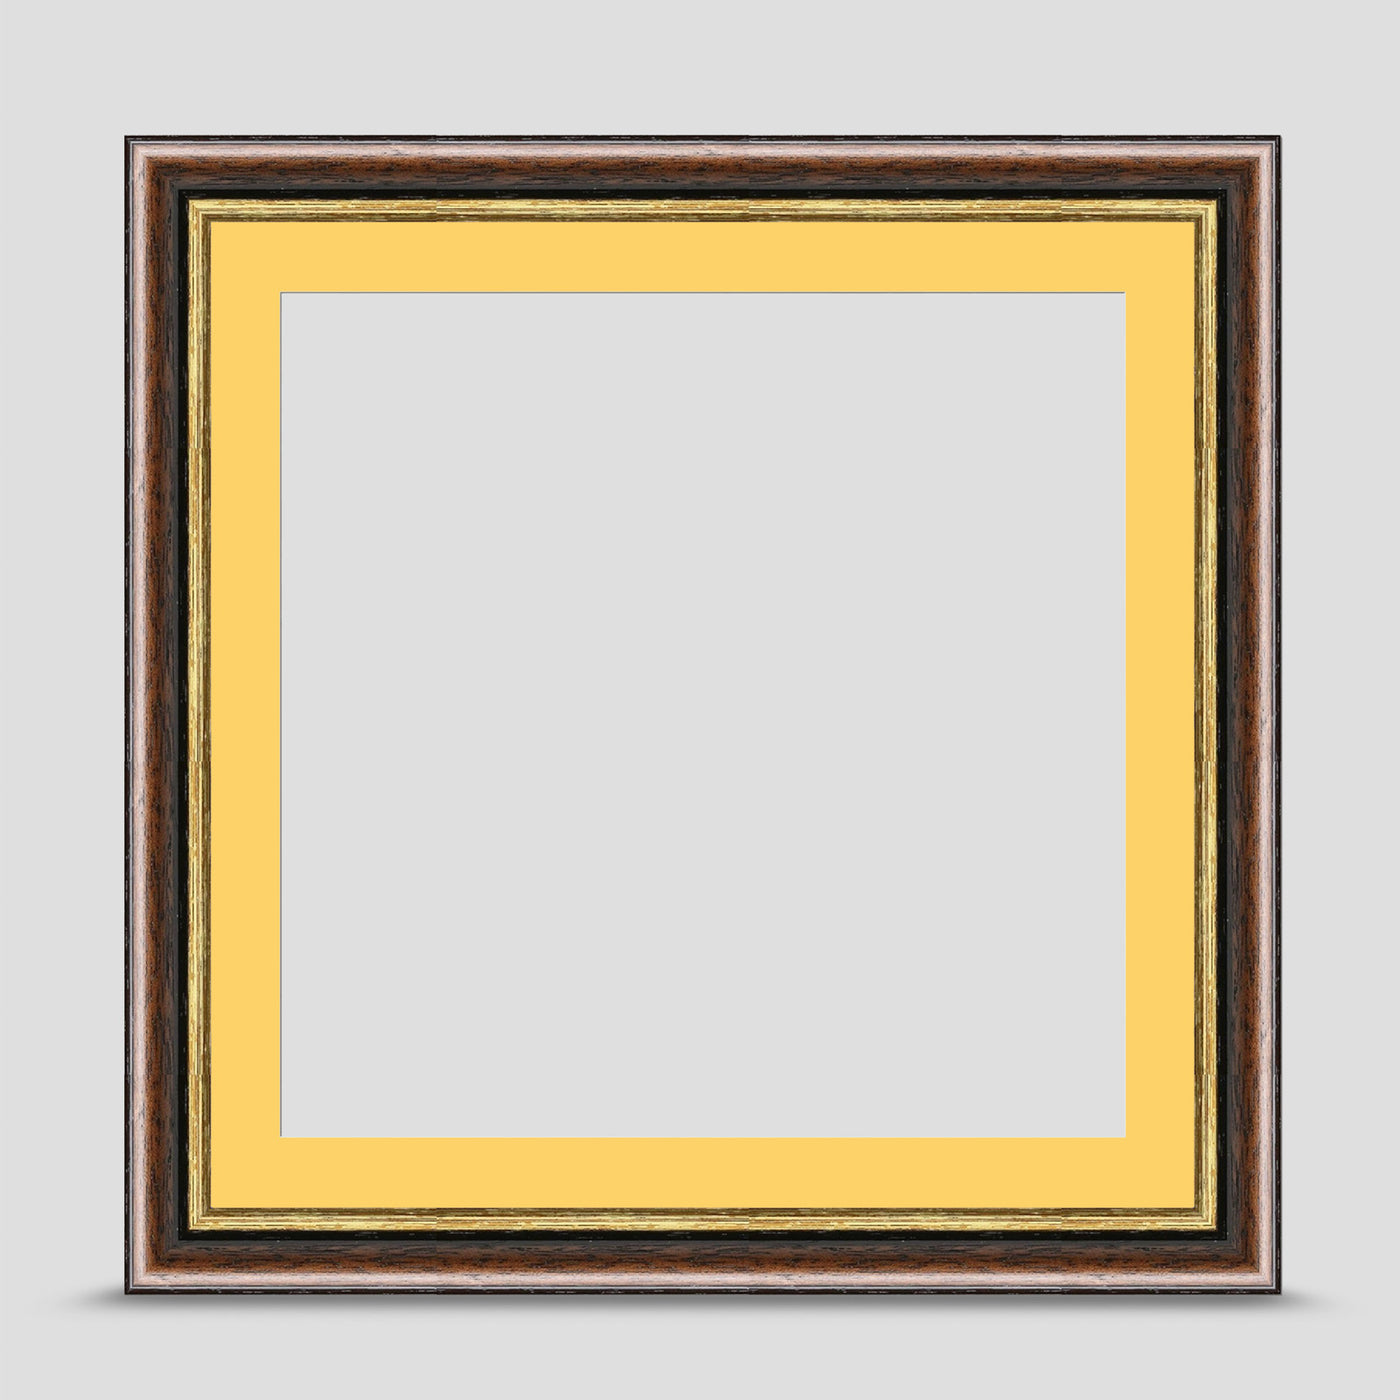 10x10 Brown & Gold Picture Frame with a 8x8 Mount